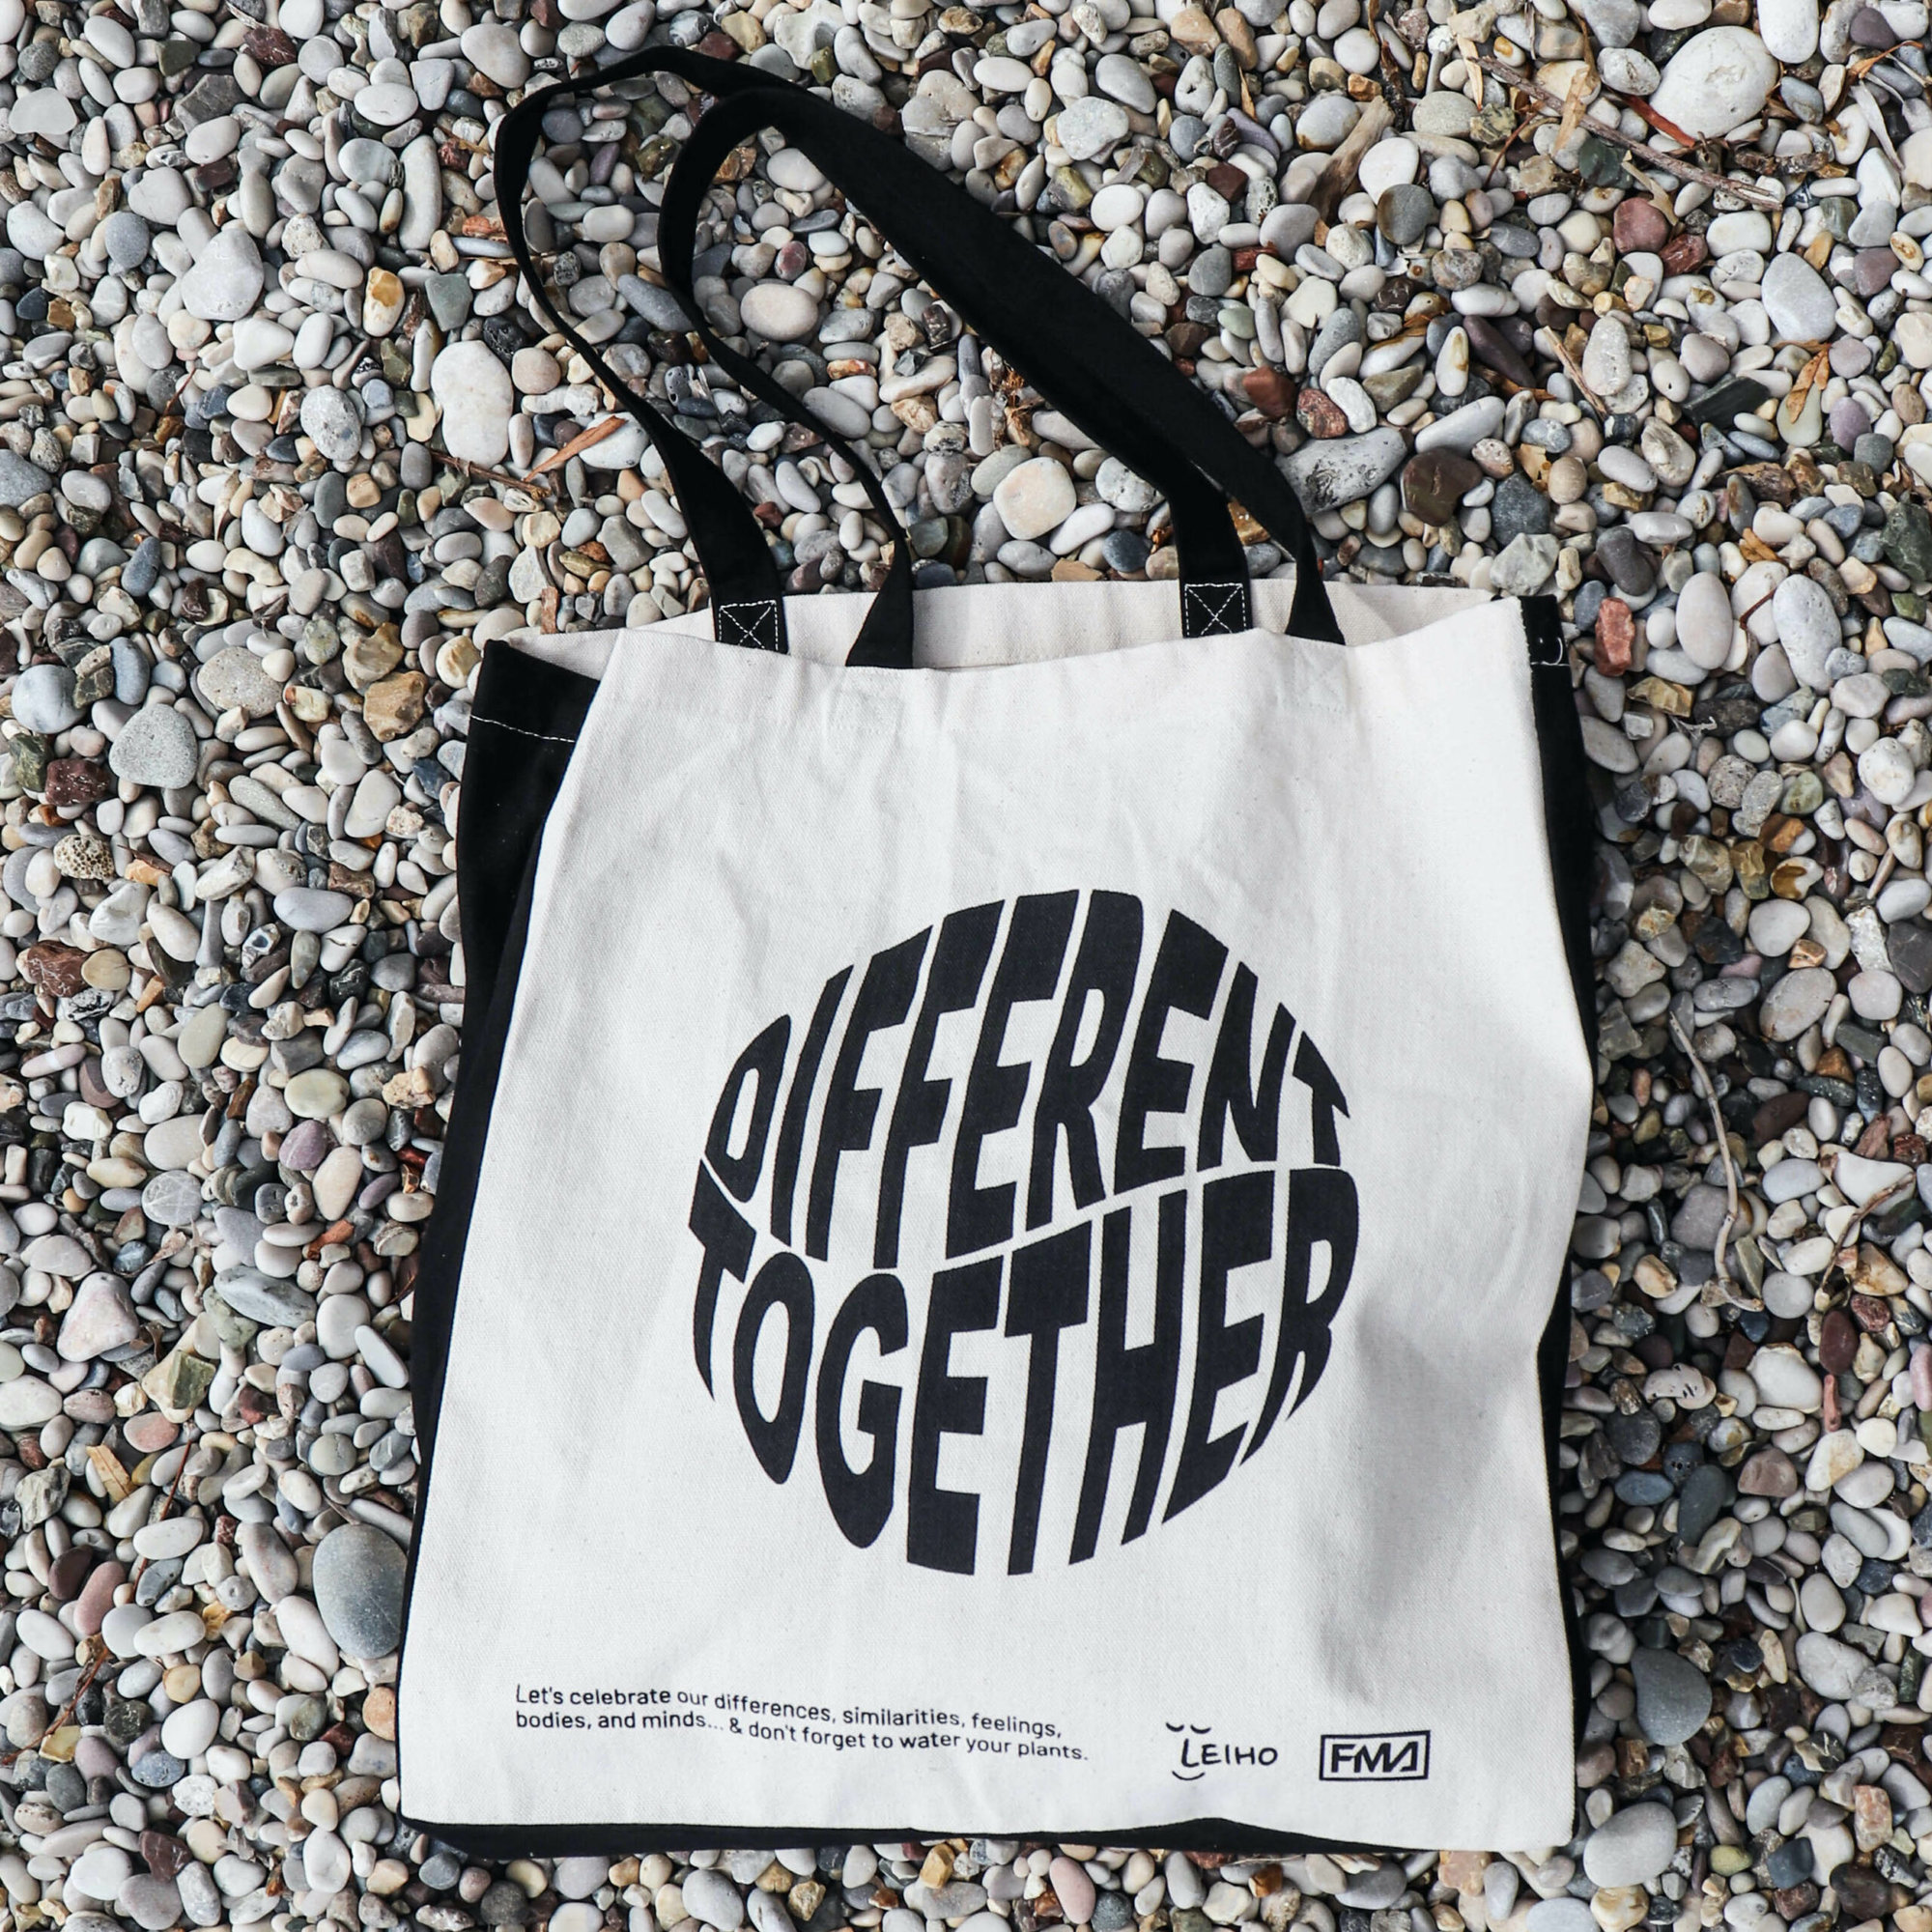 'different Together' Fair Trade Cotton Tote Bag